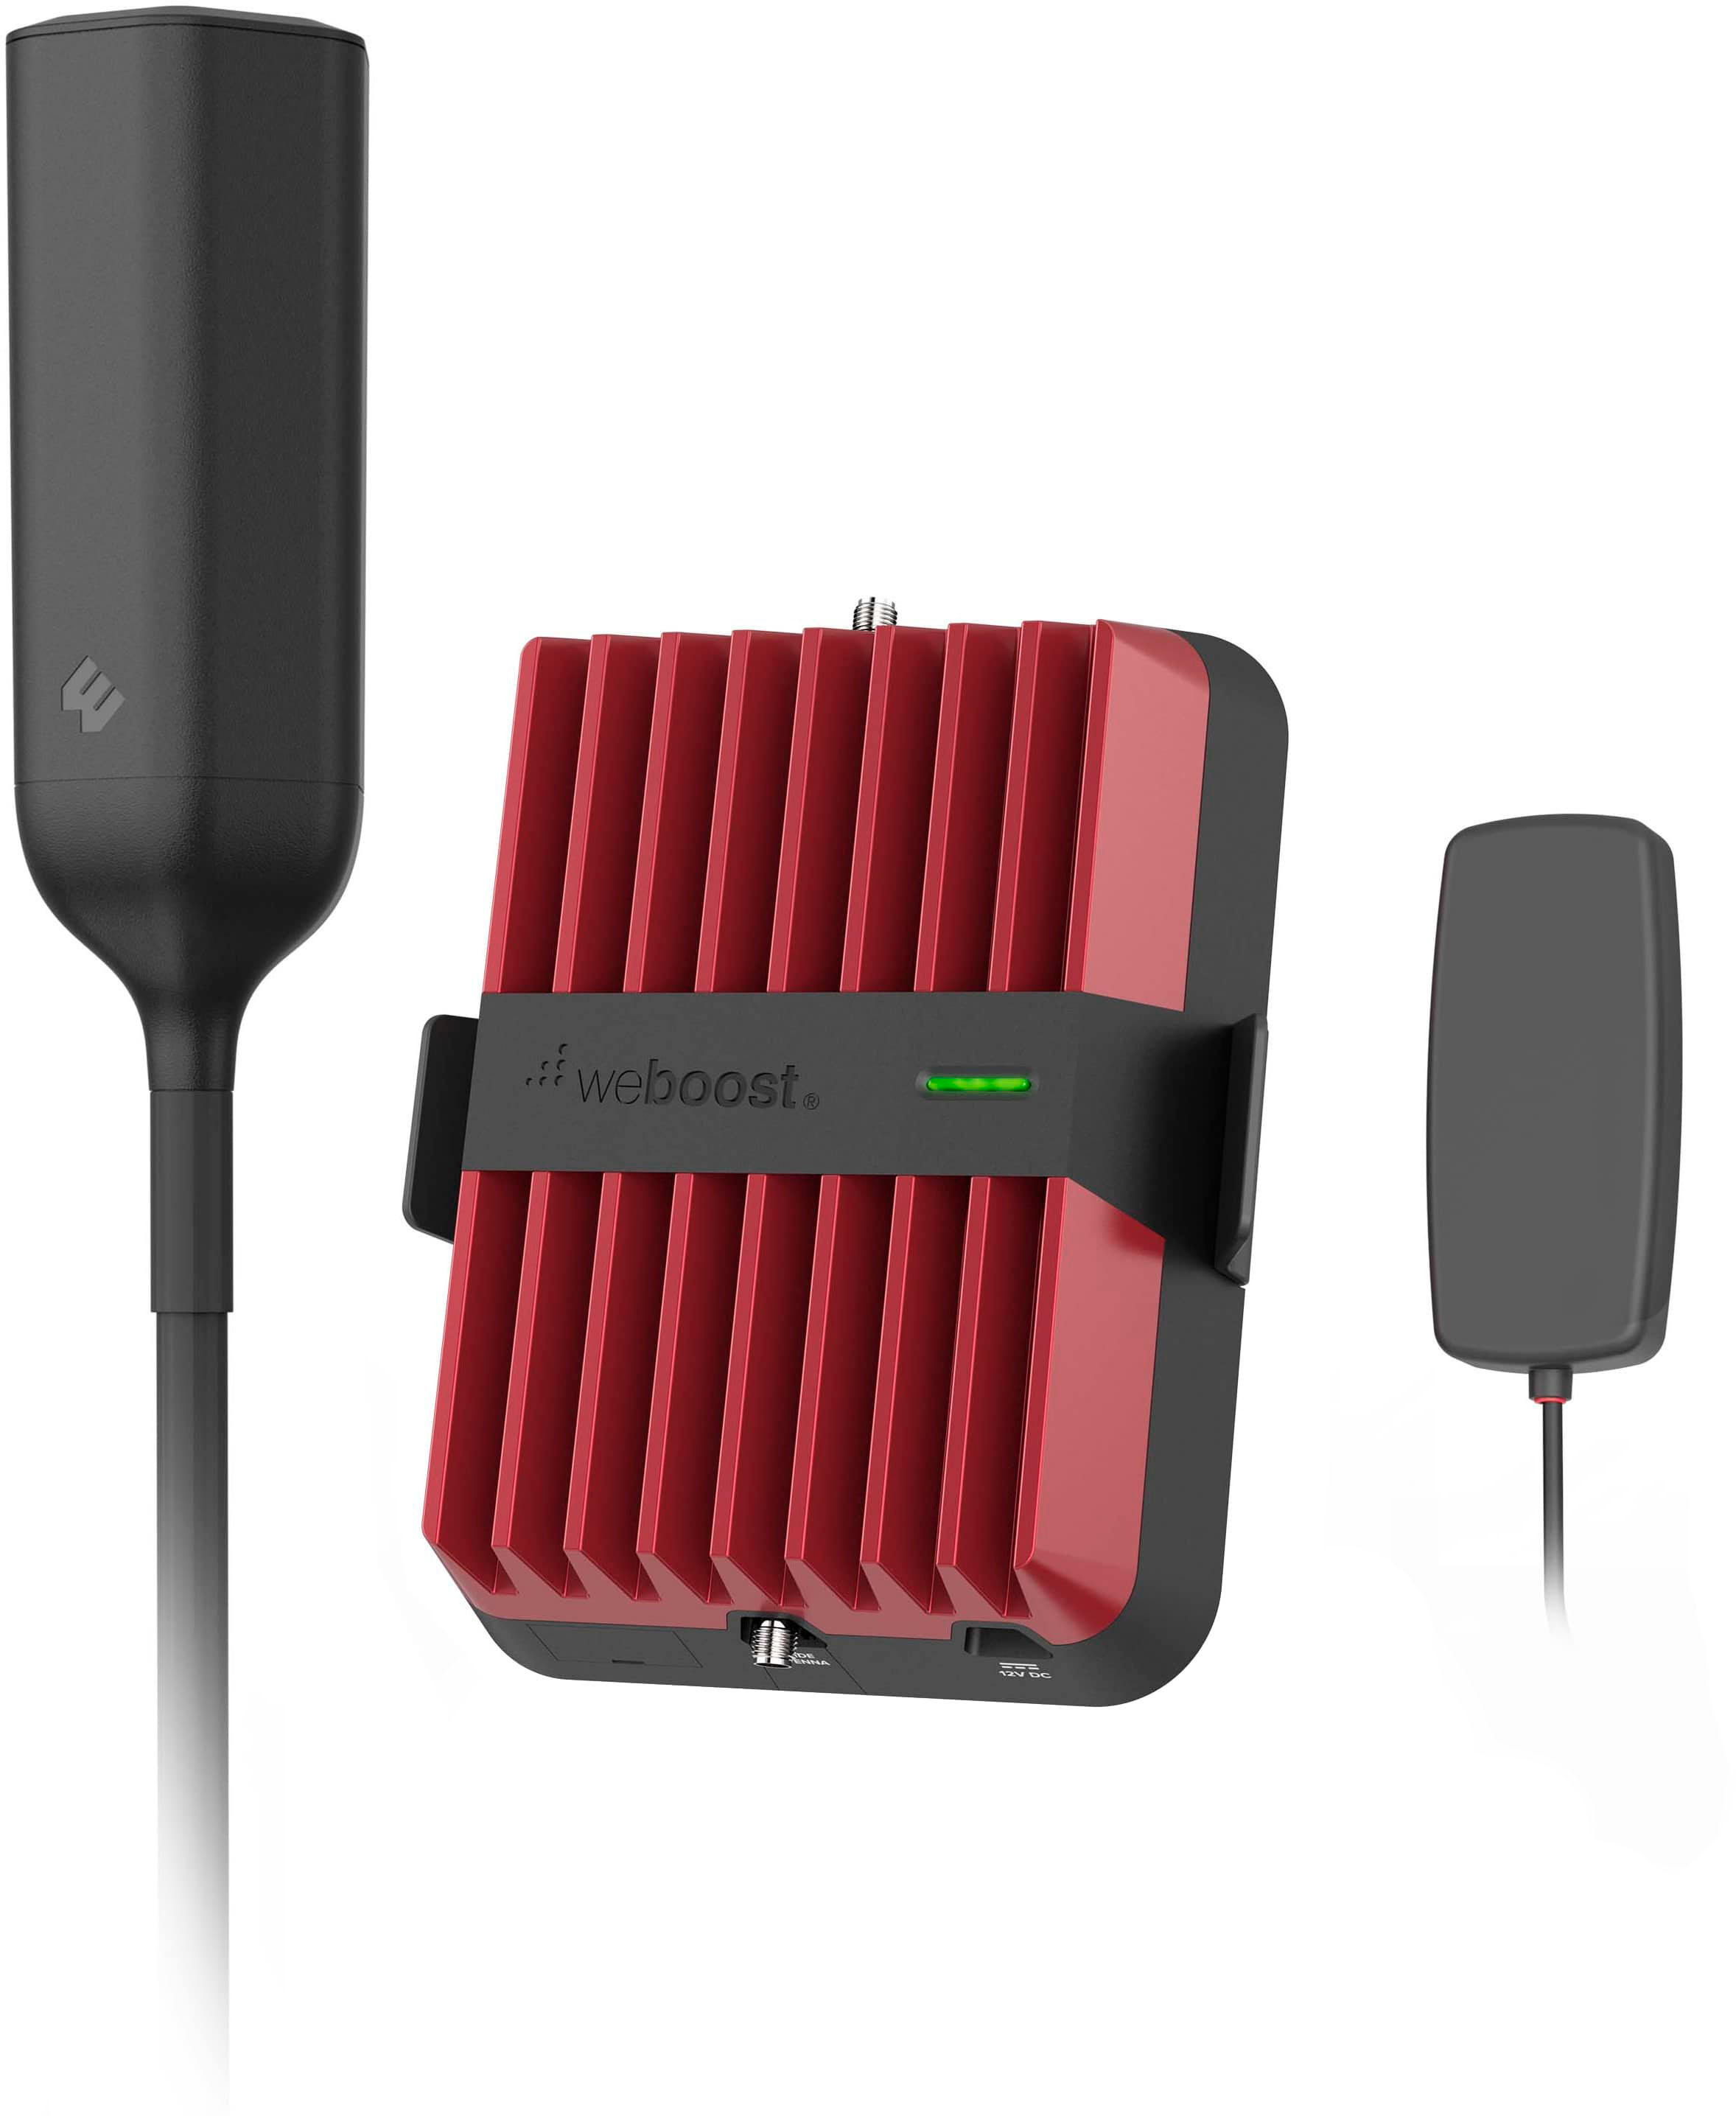 Left View: weBoost - Drive Reach OTR Cell Signal Booster Kit for Semi-Trucks and Overland Vehicles, Boosts 5G & 4G LTE for All U.S. Carriers - Black